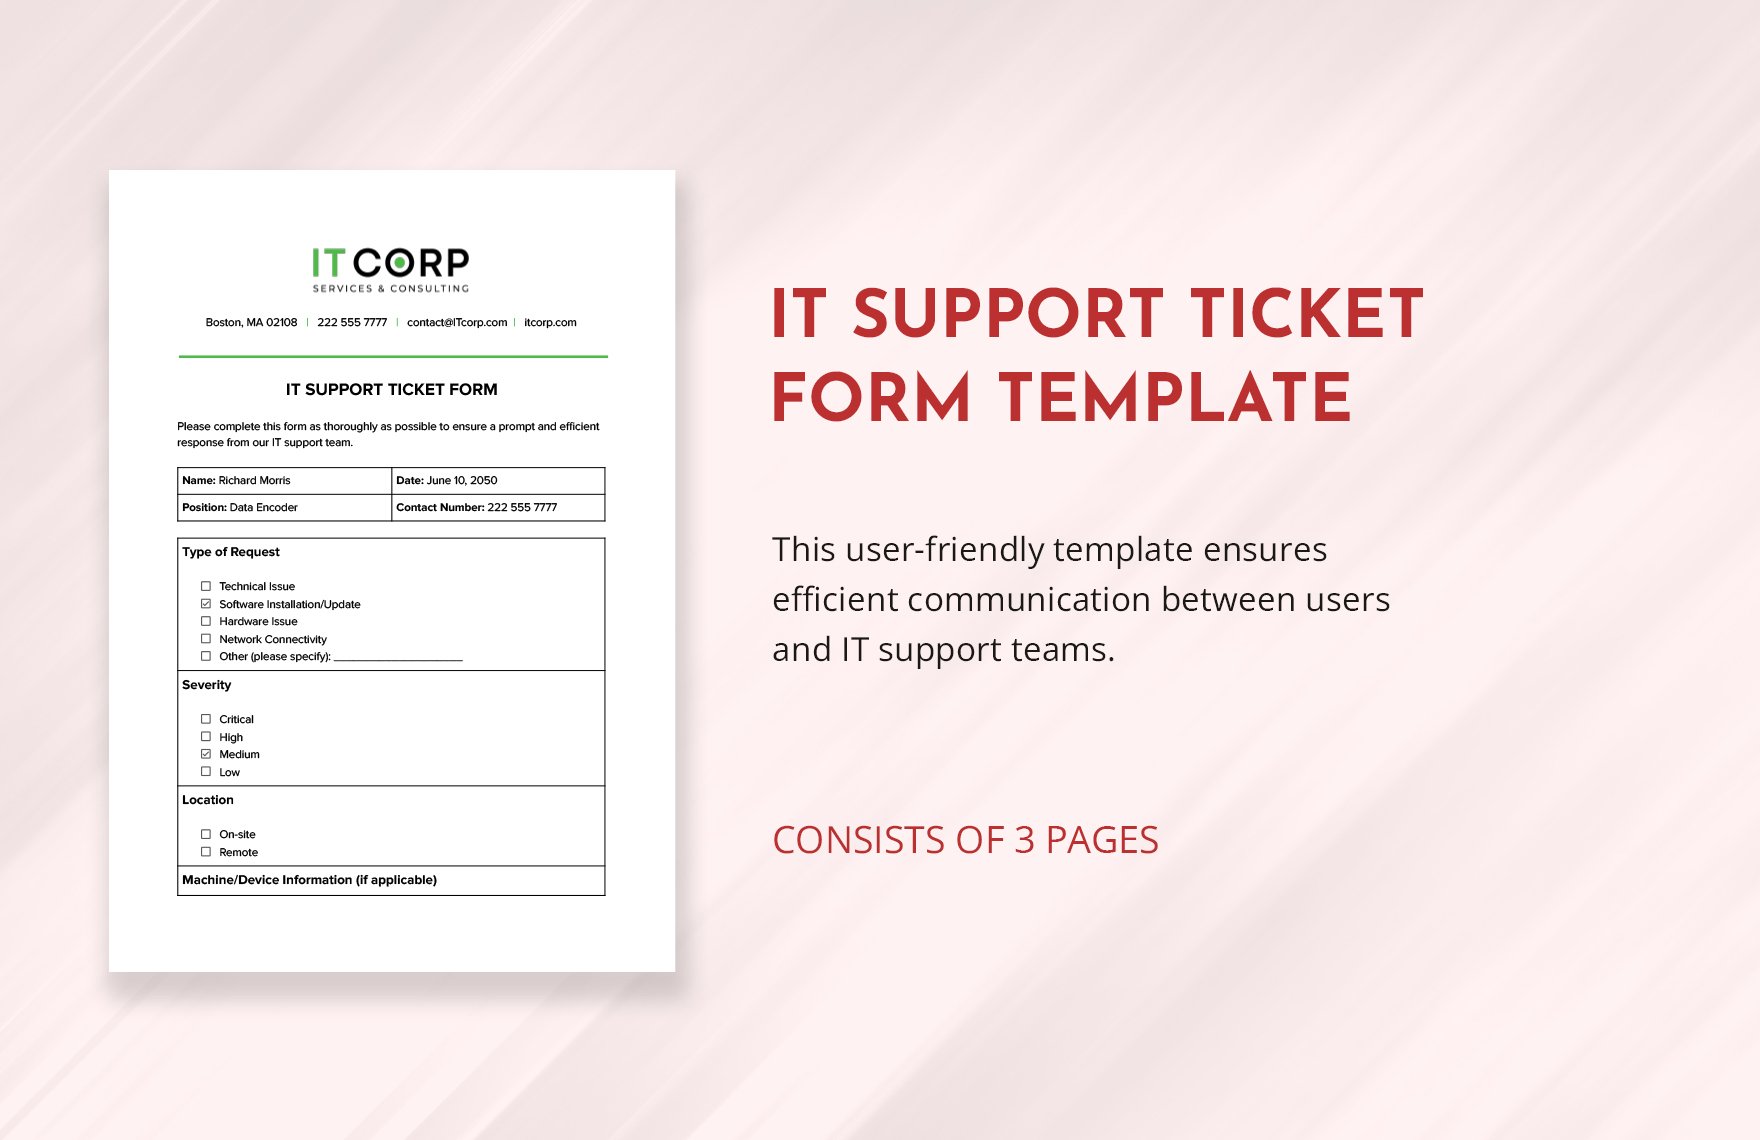 IT Support Ticket Form Template